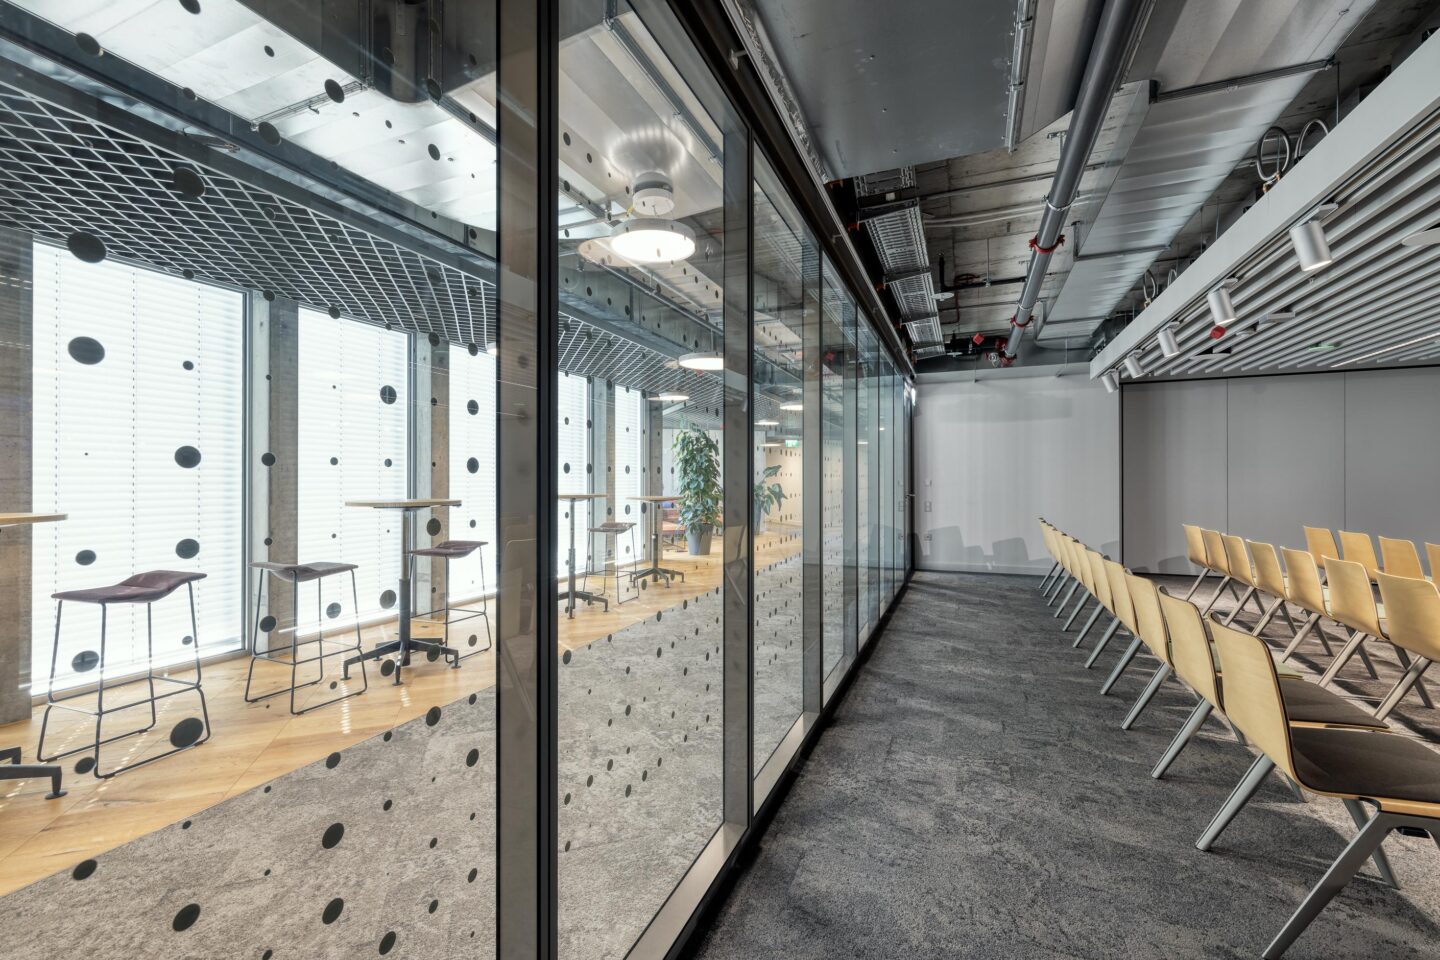 System walls from feco │ all - glass construction │ Microsoft headquarters in Zurich